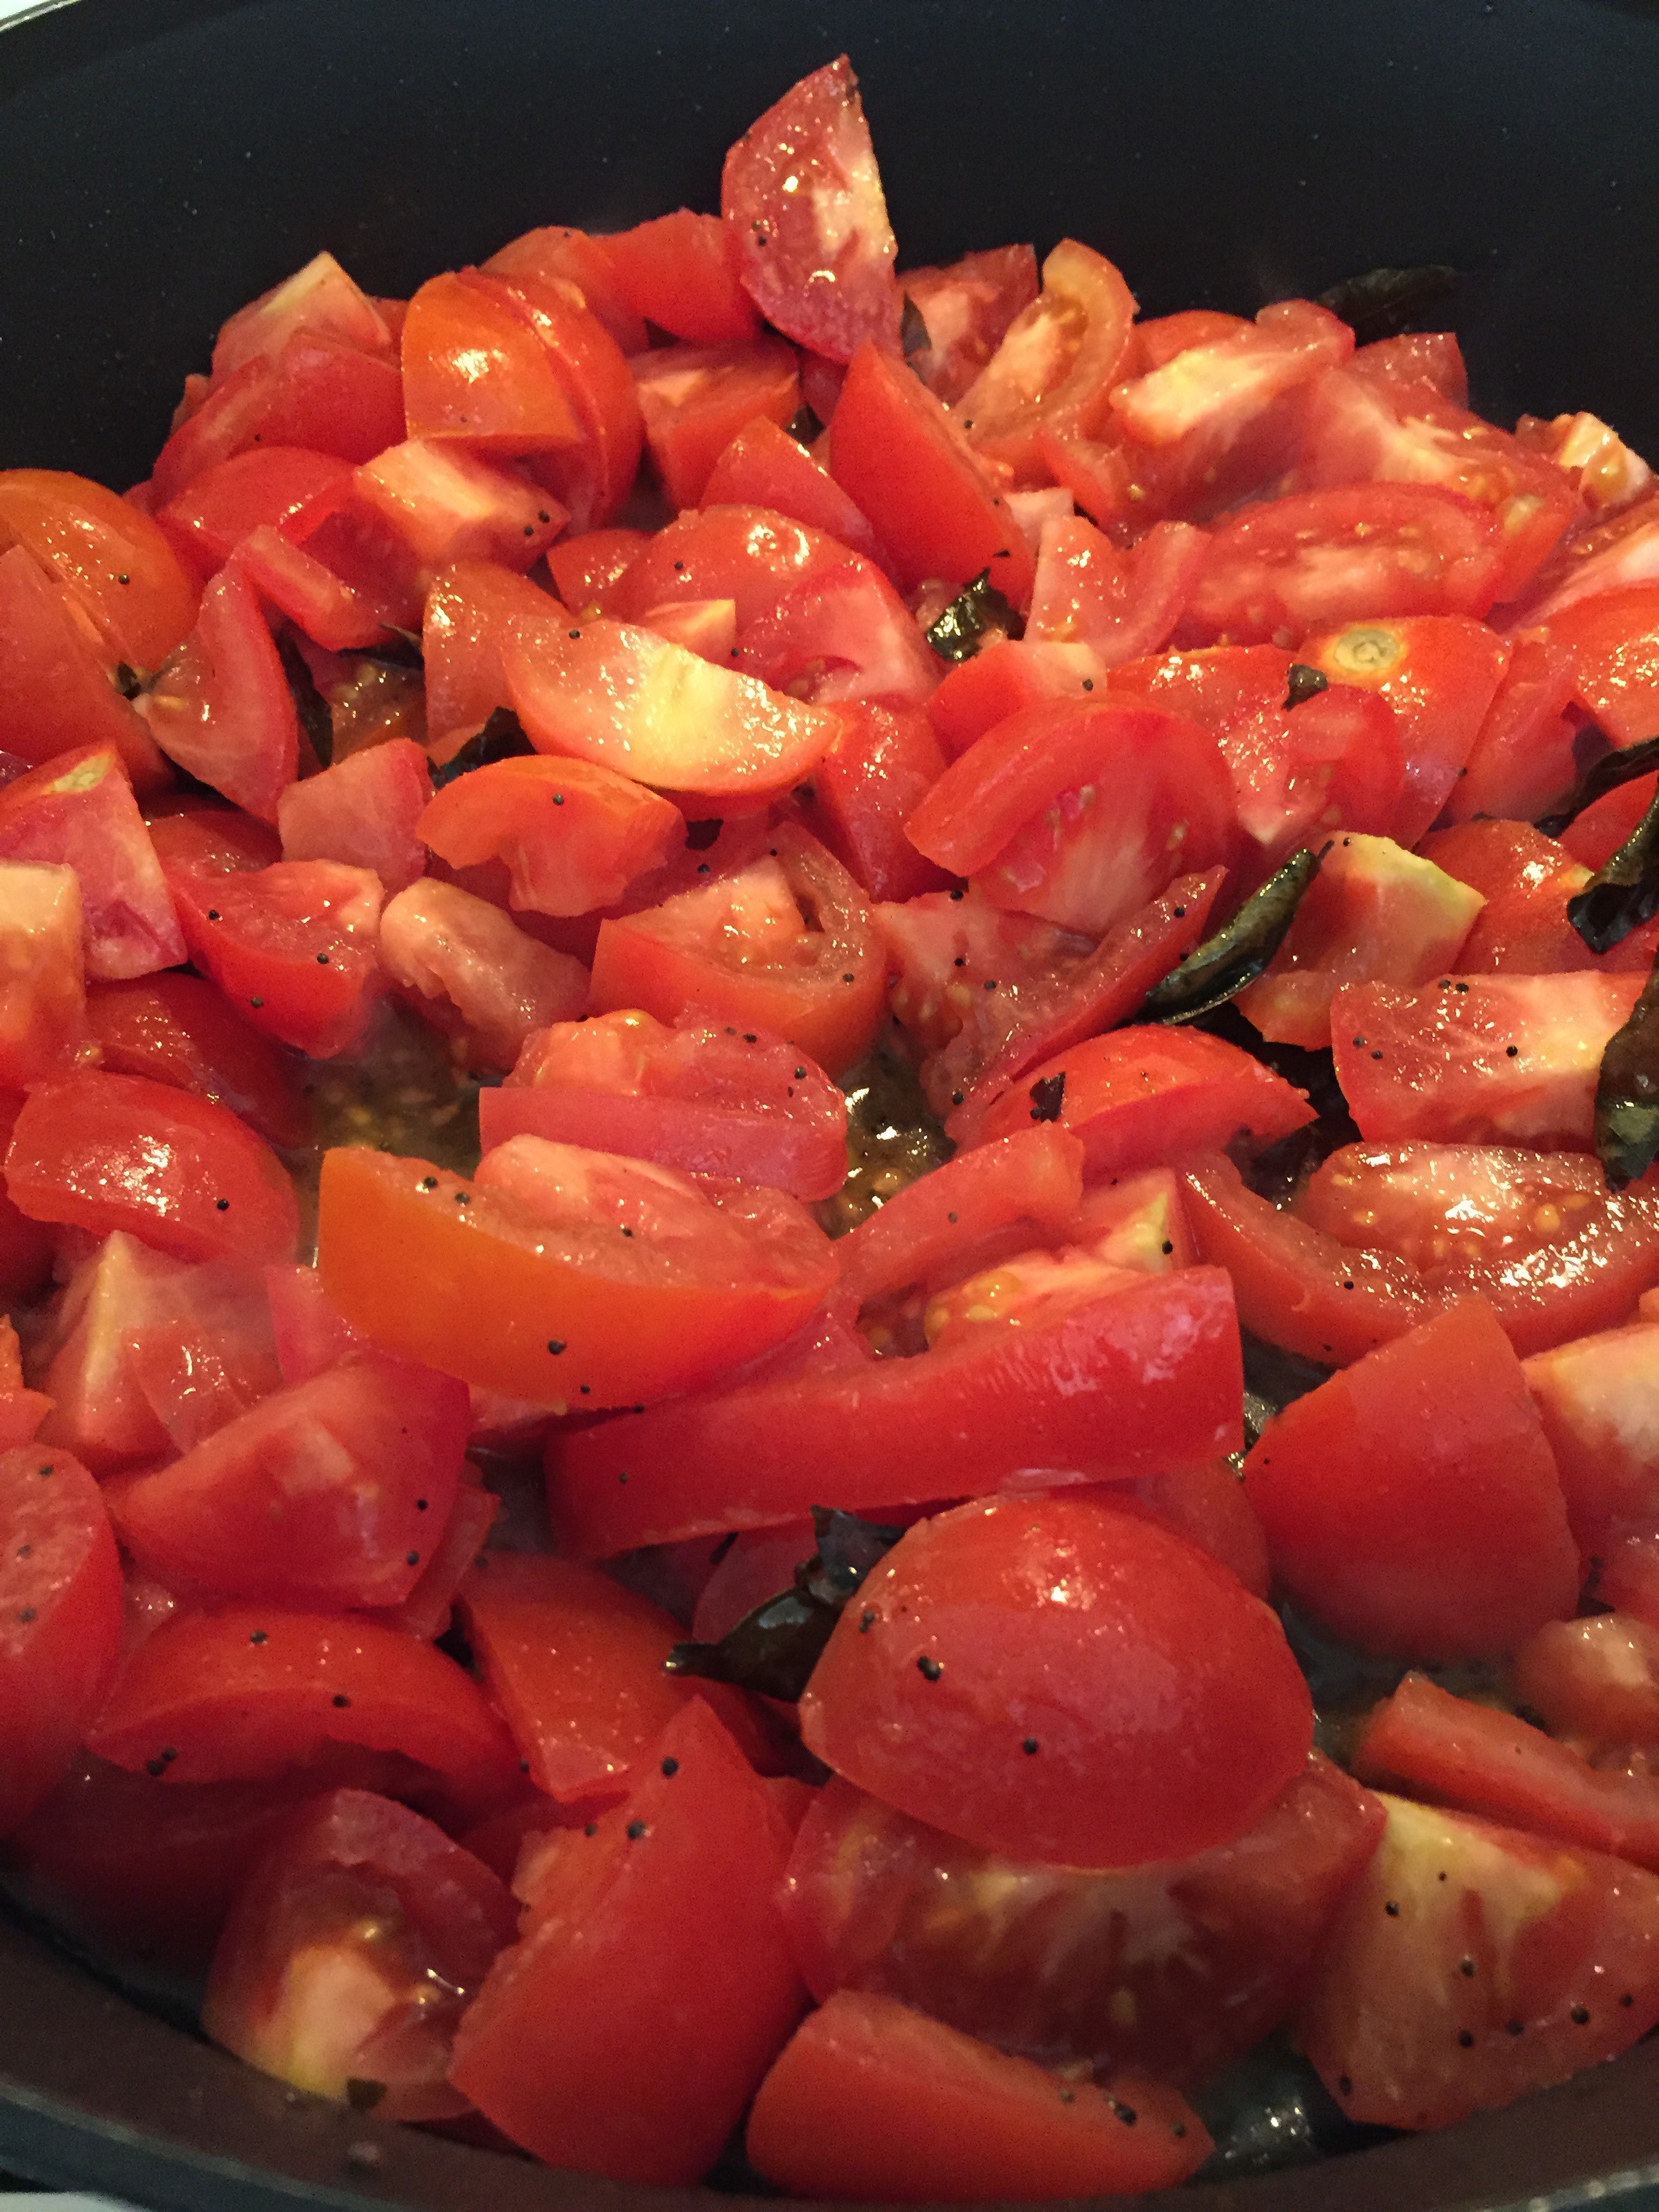 Cooking down tomatoes for chutney